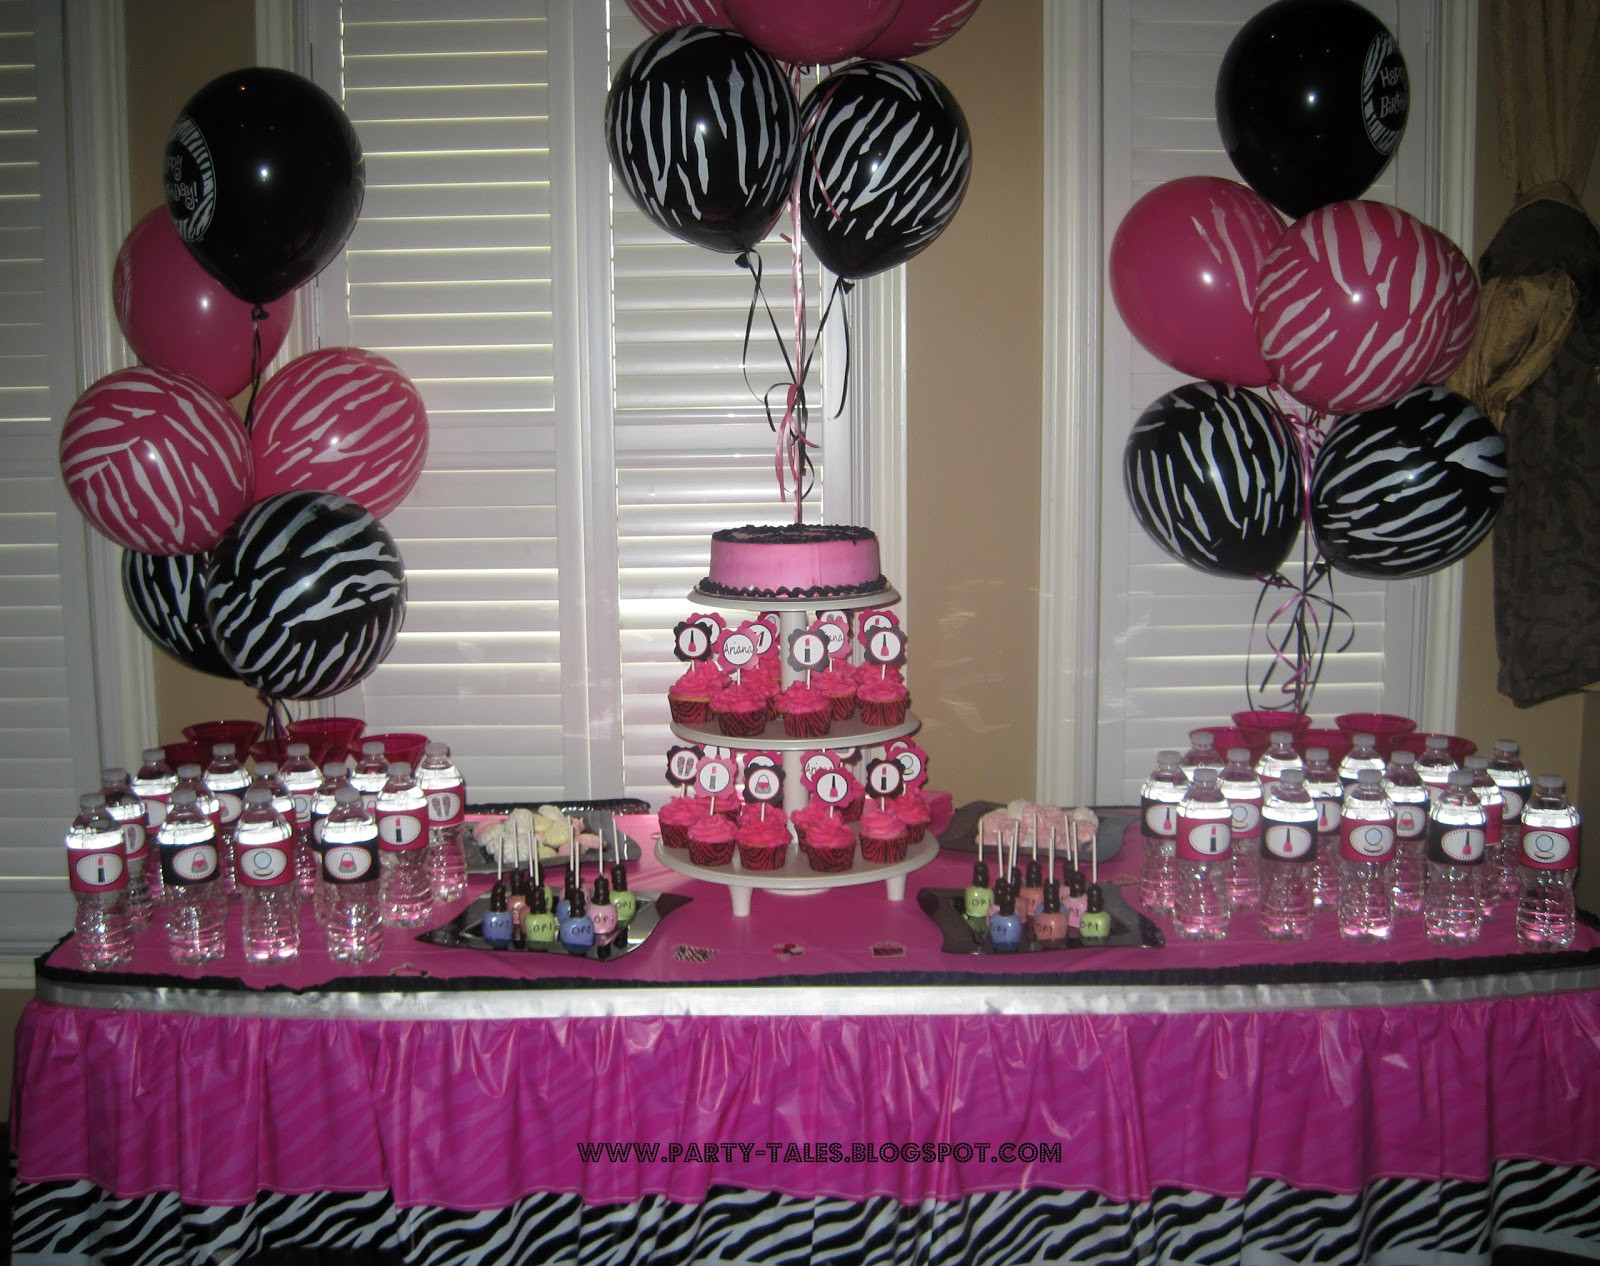 Diva Birthday Party Decorations
 Party Tales Birthday Party Zebra Print and Hot Pink